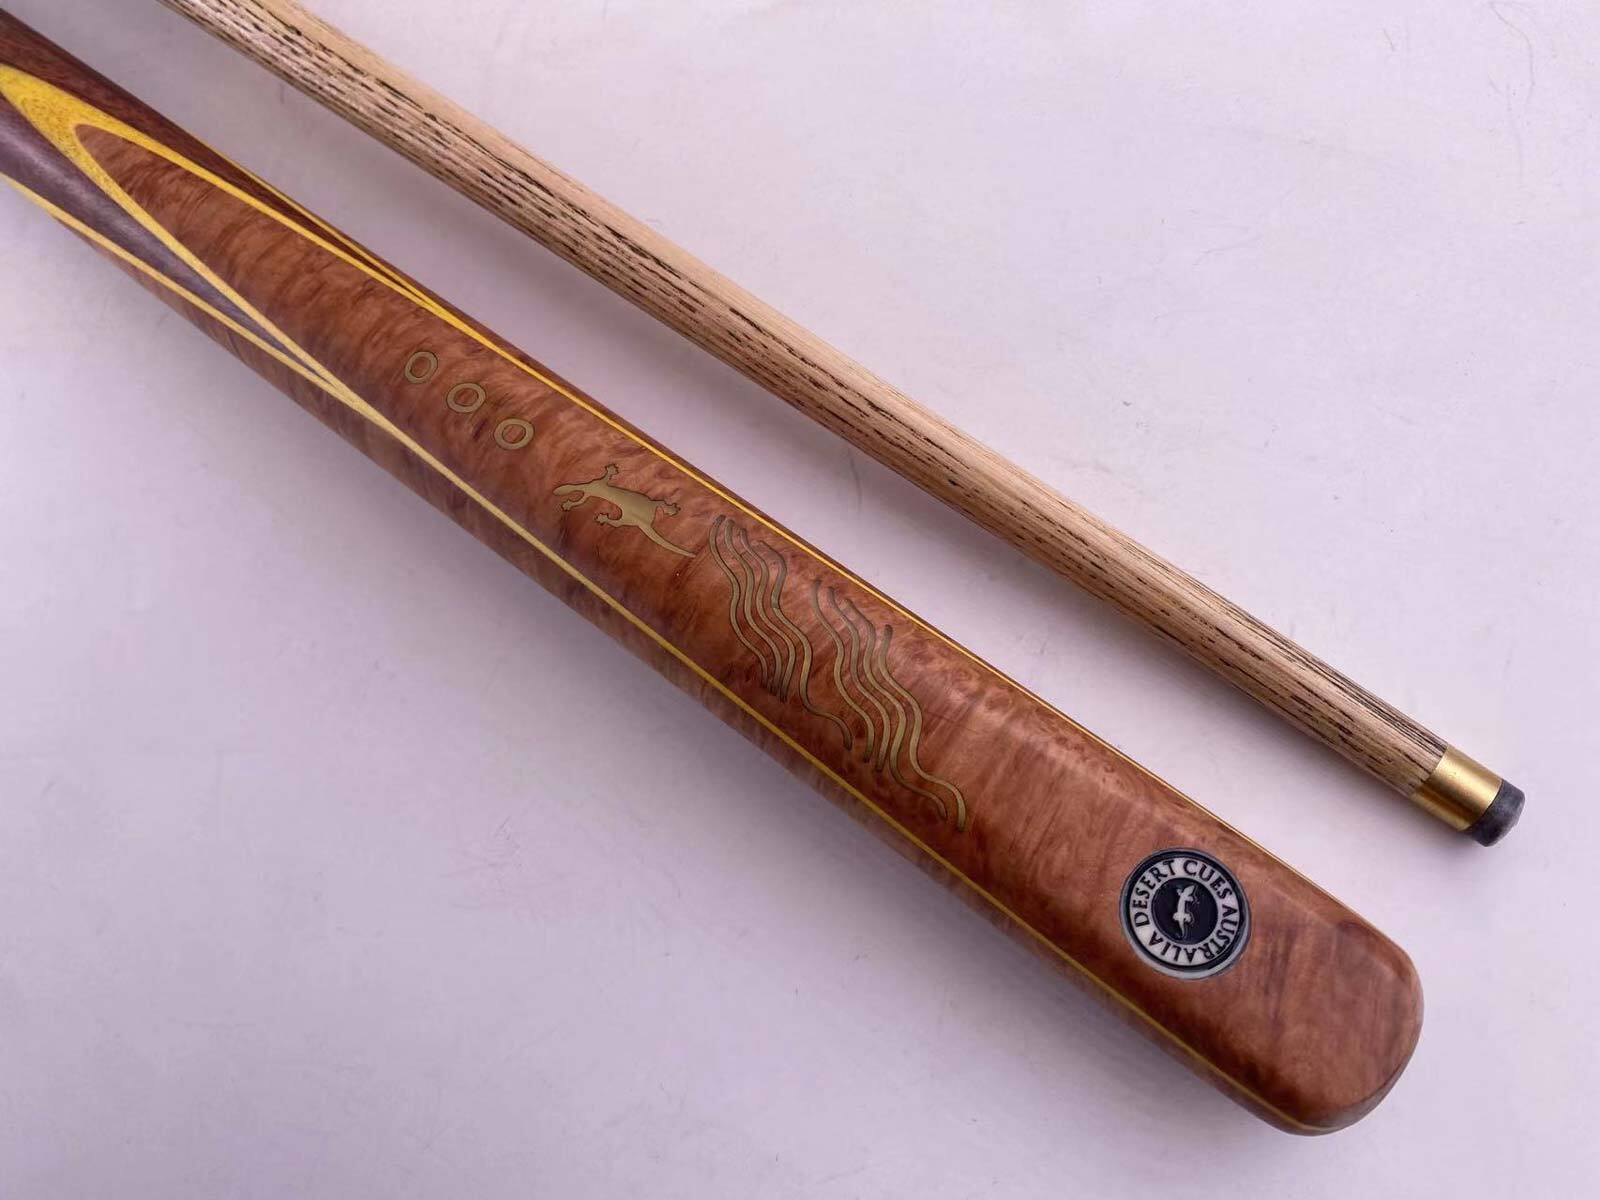 The Kimberley Crossing - 2pc Desert Cue with rod Jarrah butt with Mallee splice, 4 splice